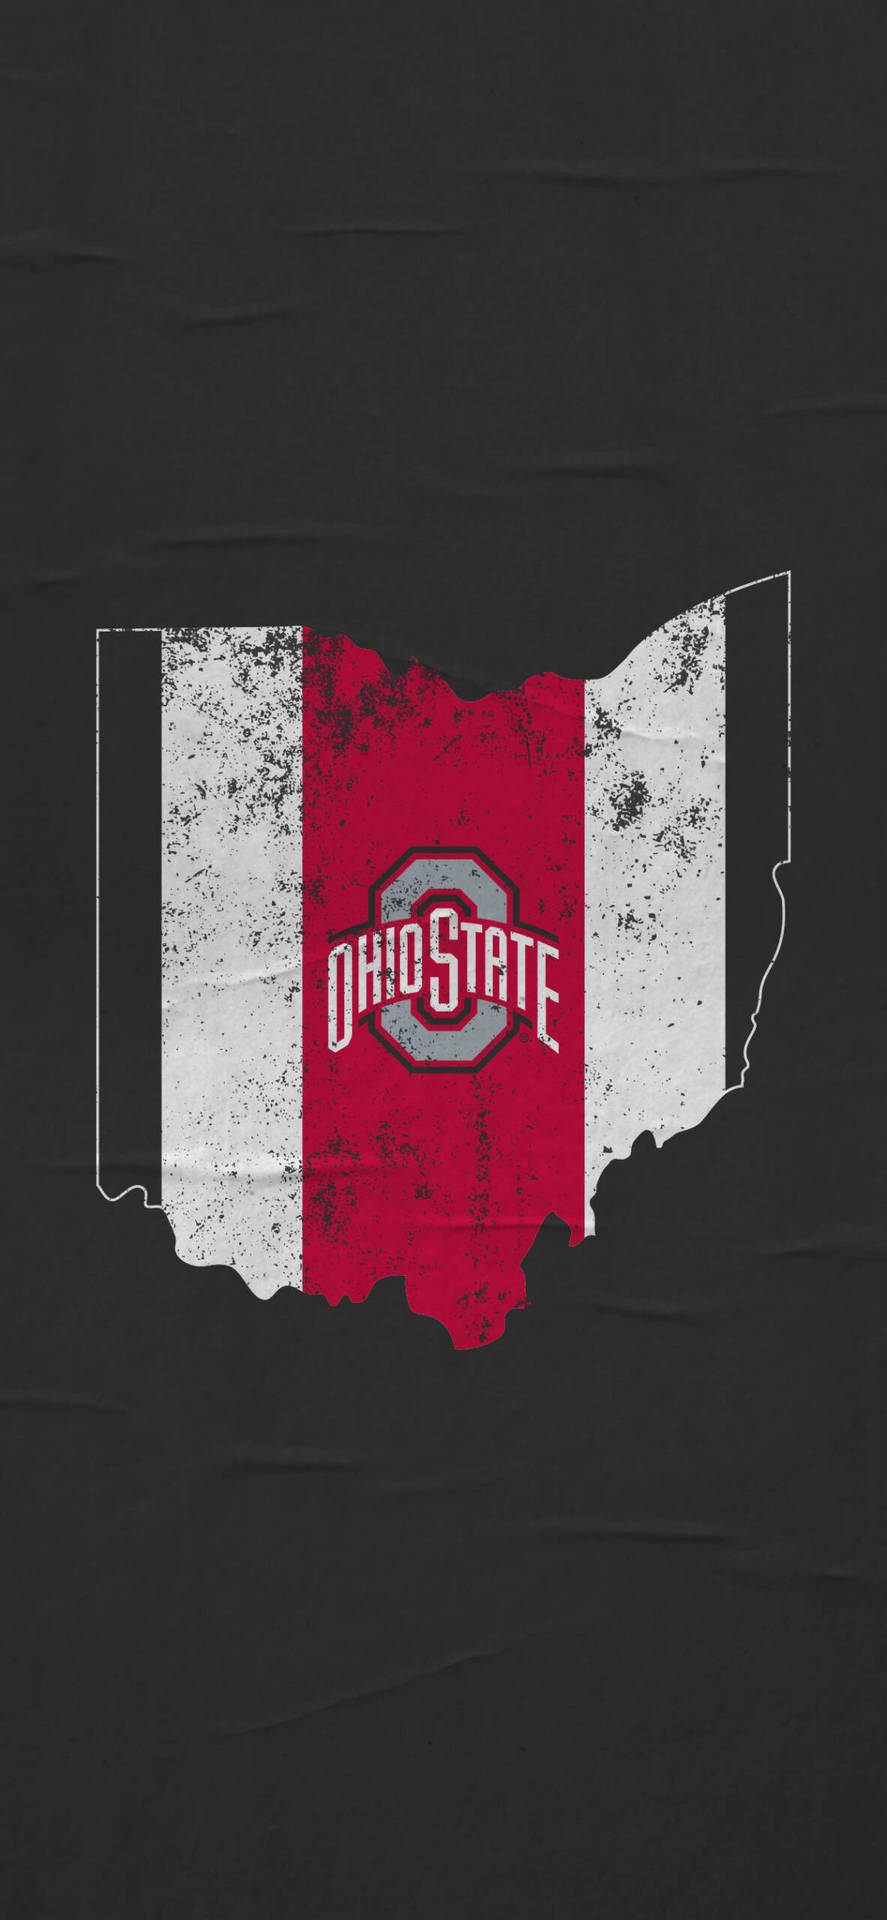 Ohio State University Colors And Map Wallpaper